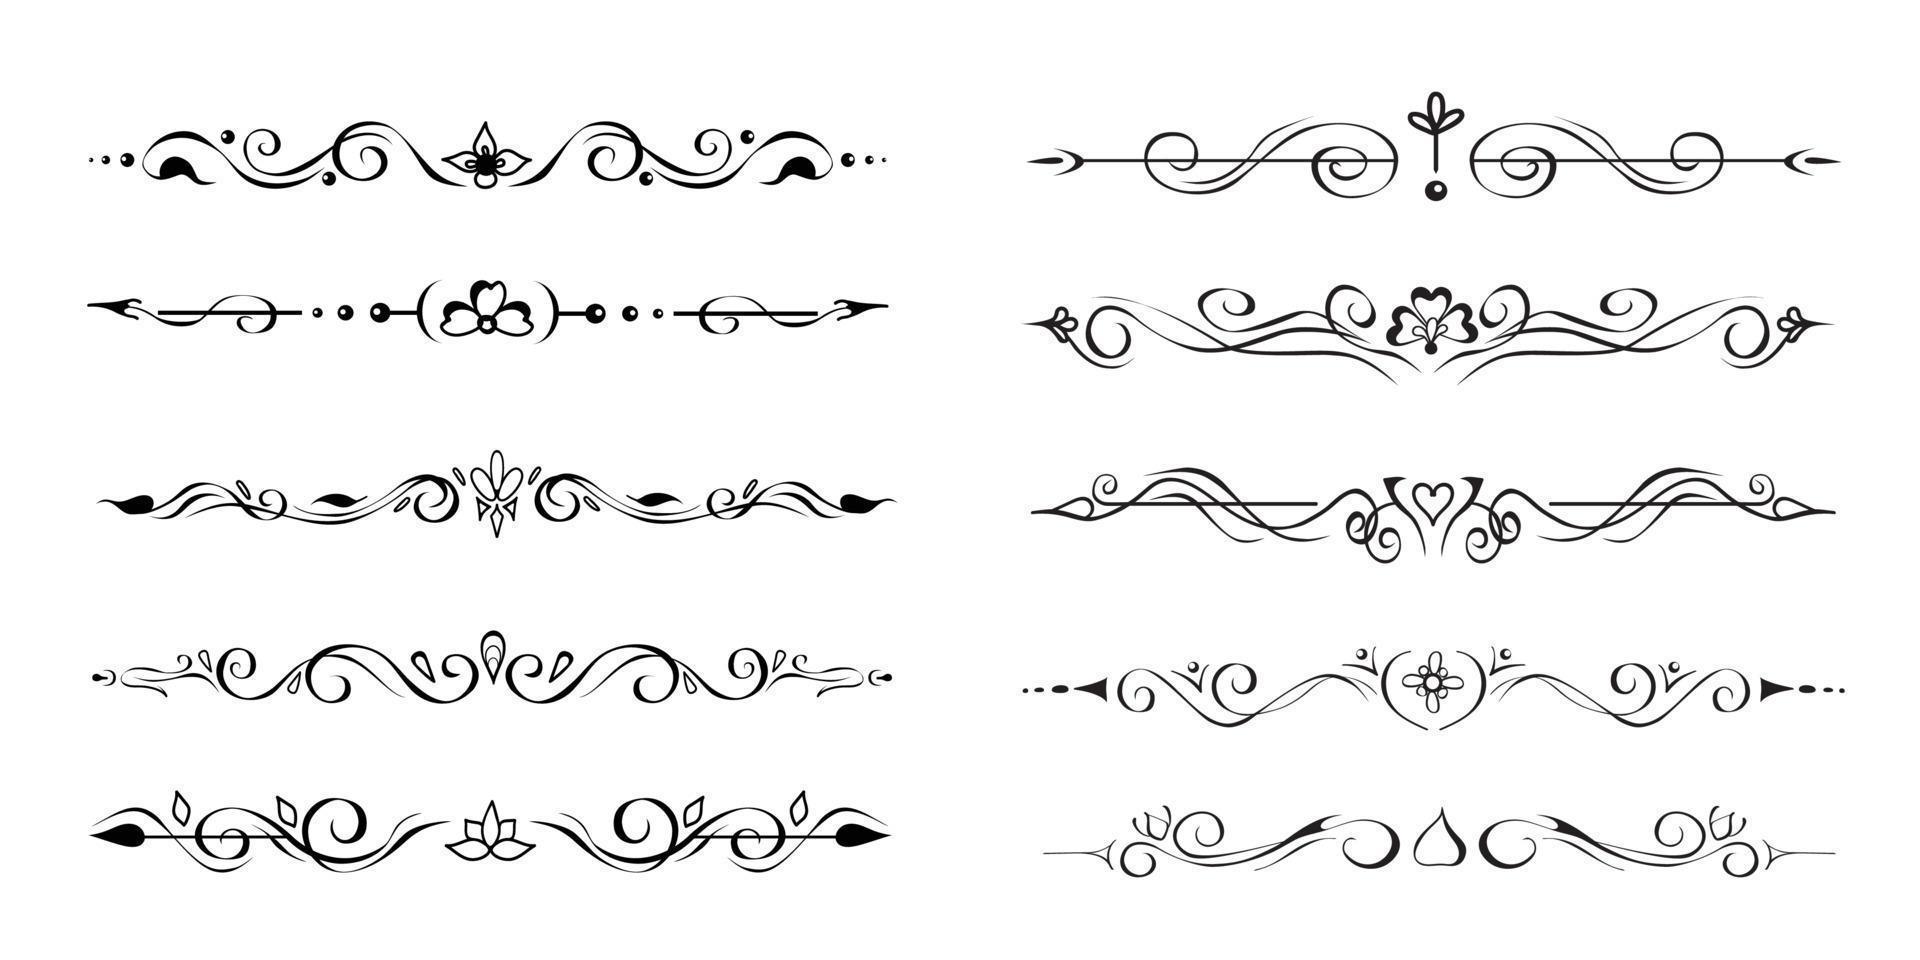 Set of Ornate Text Delimiters, Dividers, Page Bottom Decorative Borders, Vignettes. Hand-Drawn Romantic Elements vector